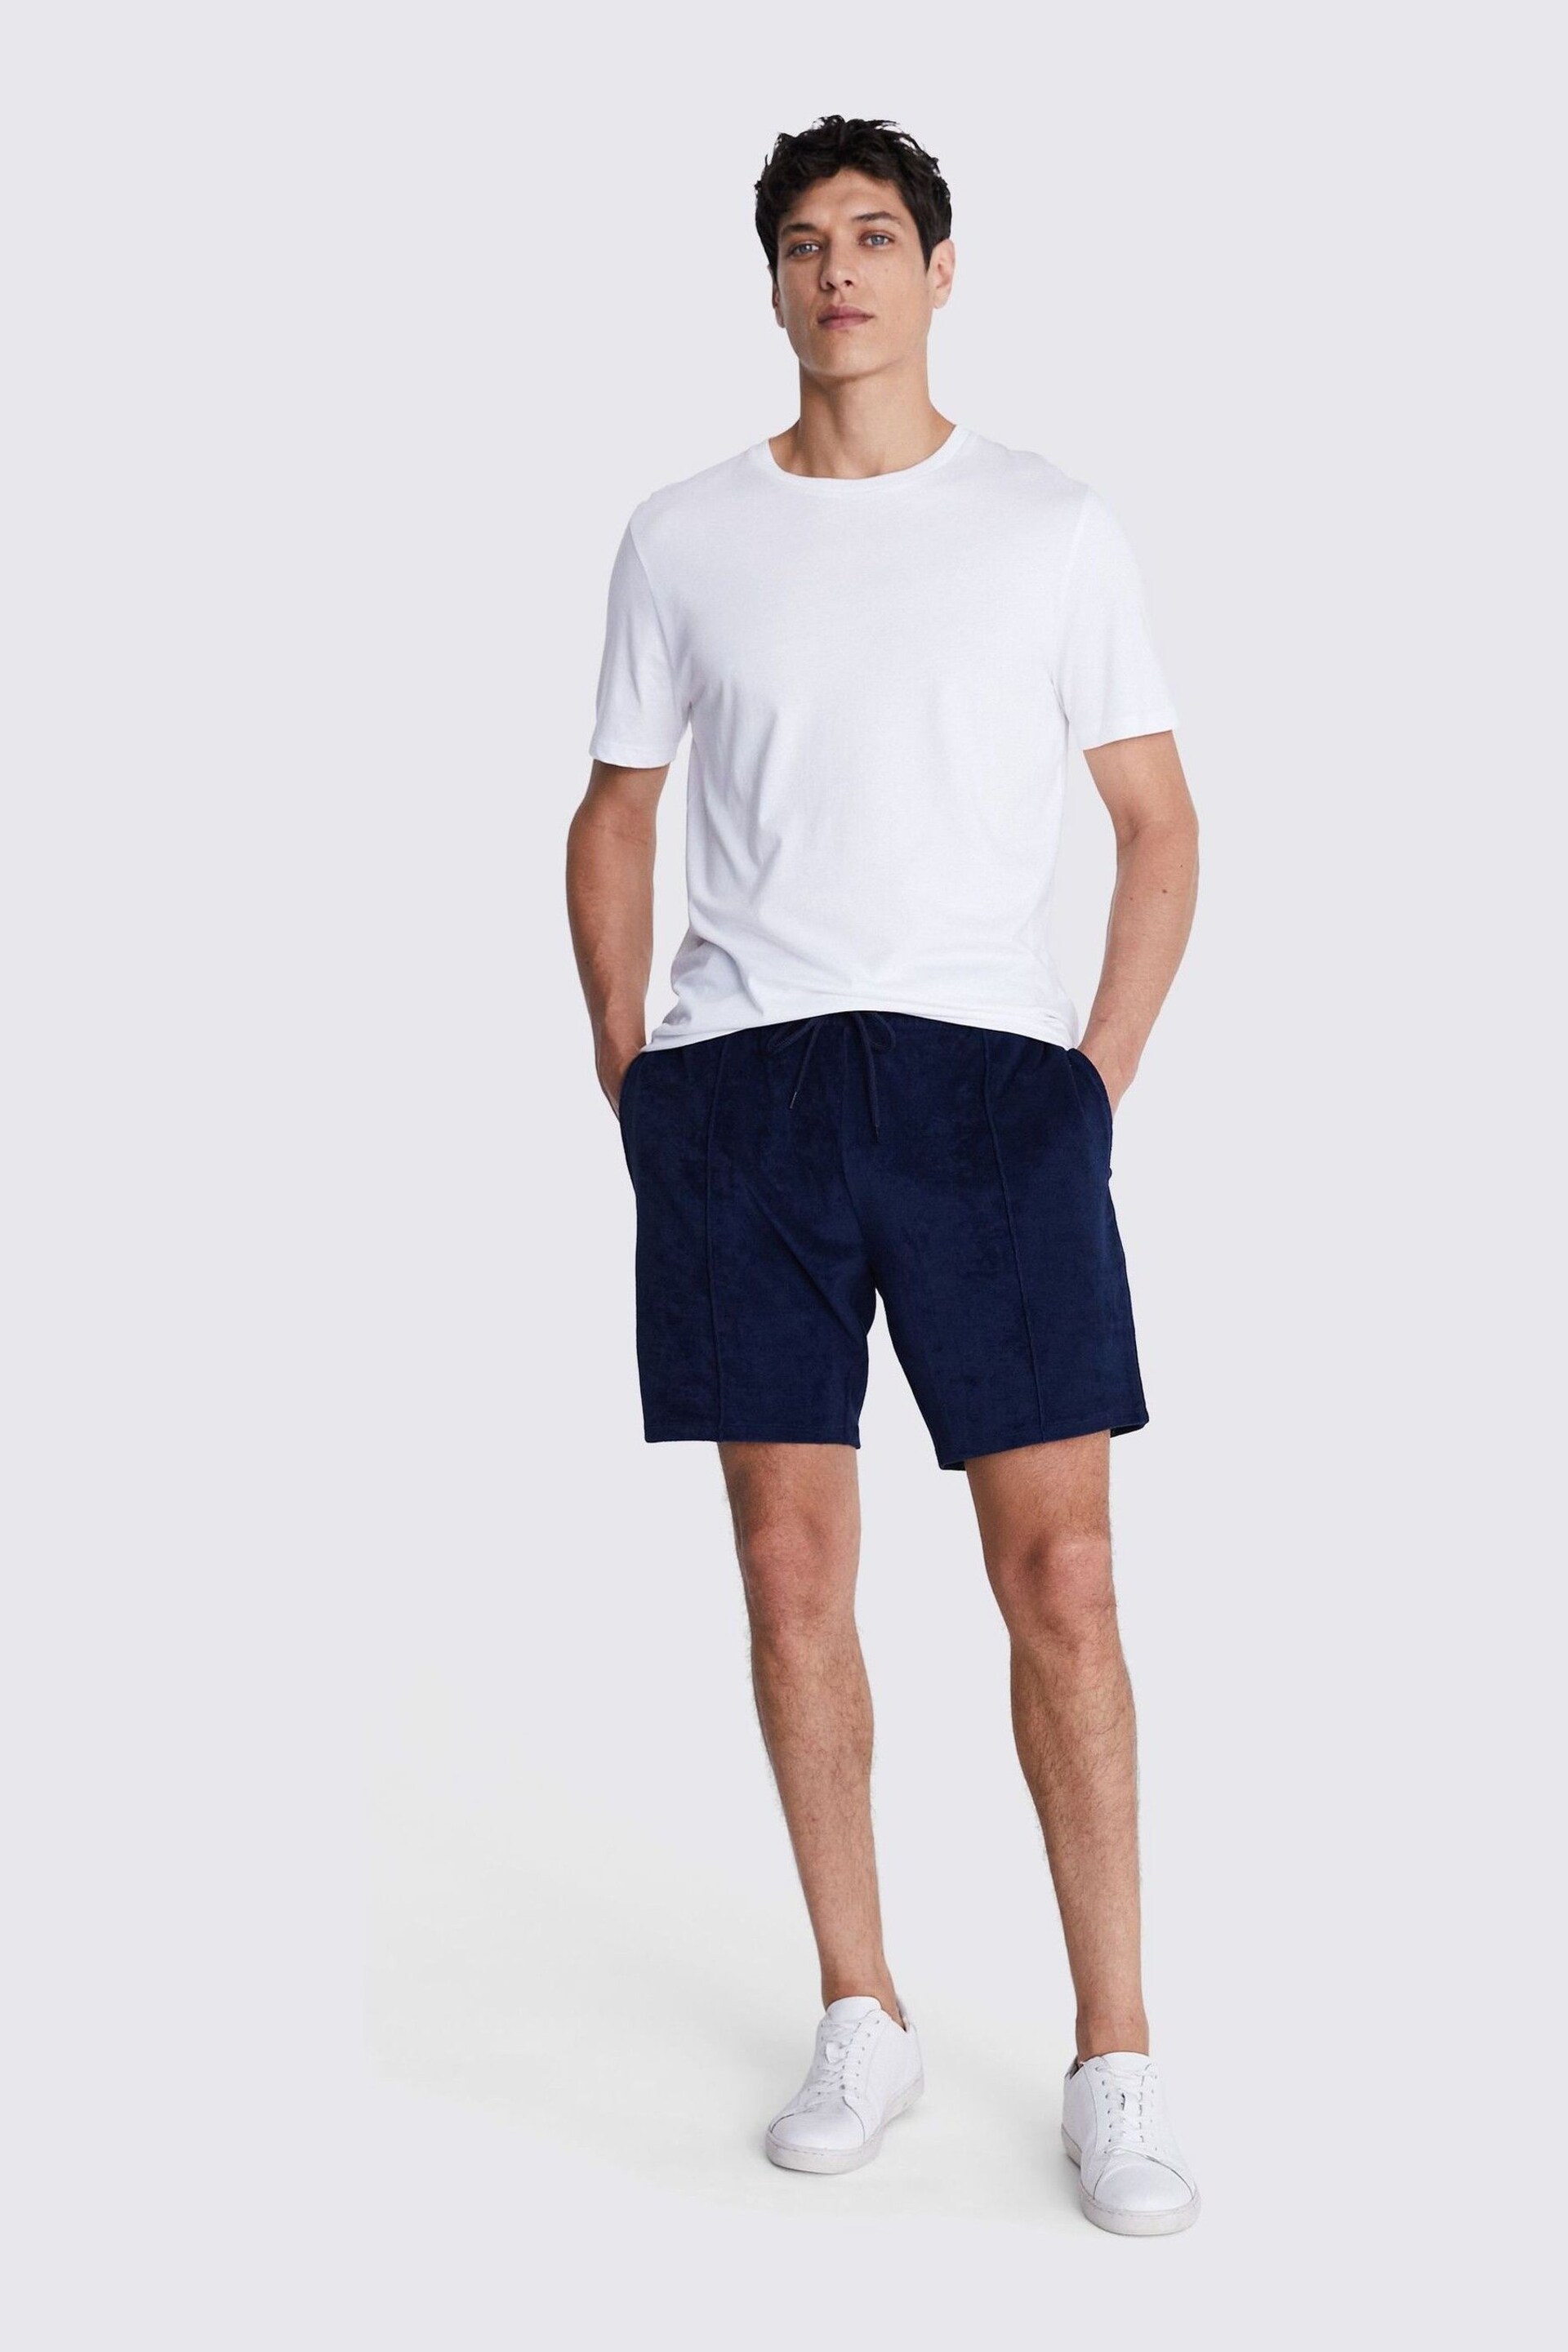 MOSS Blue Terry Towelling Shorts - Image 2 of 4